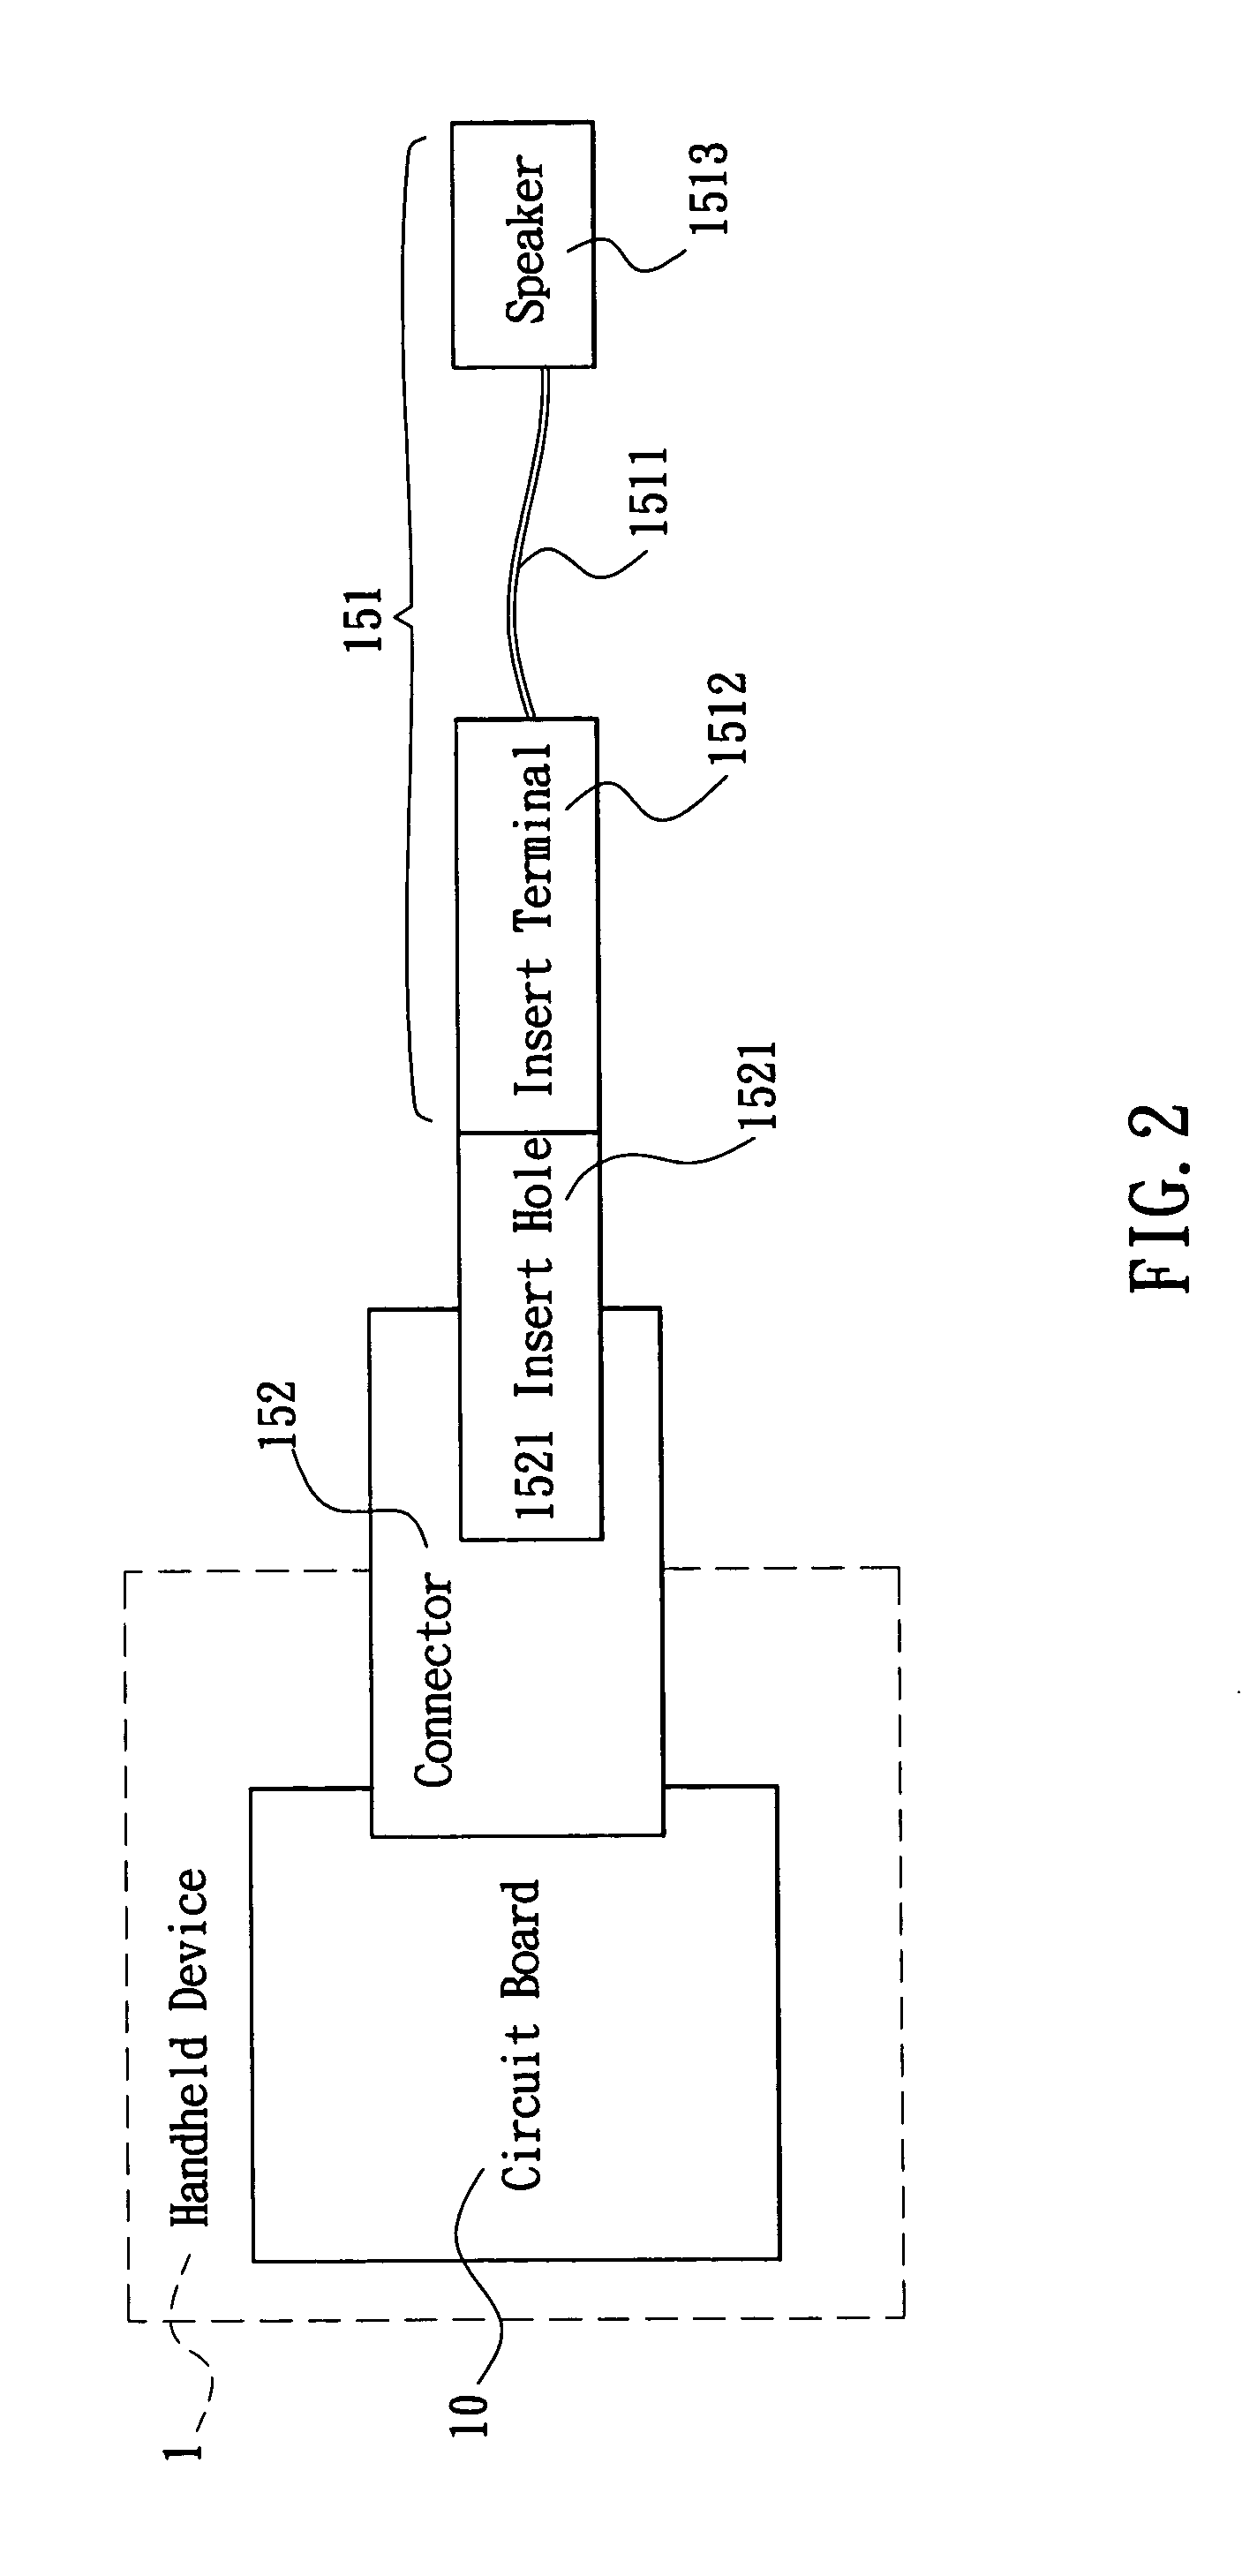 Handheld device with hearing aid function